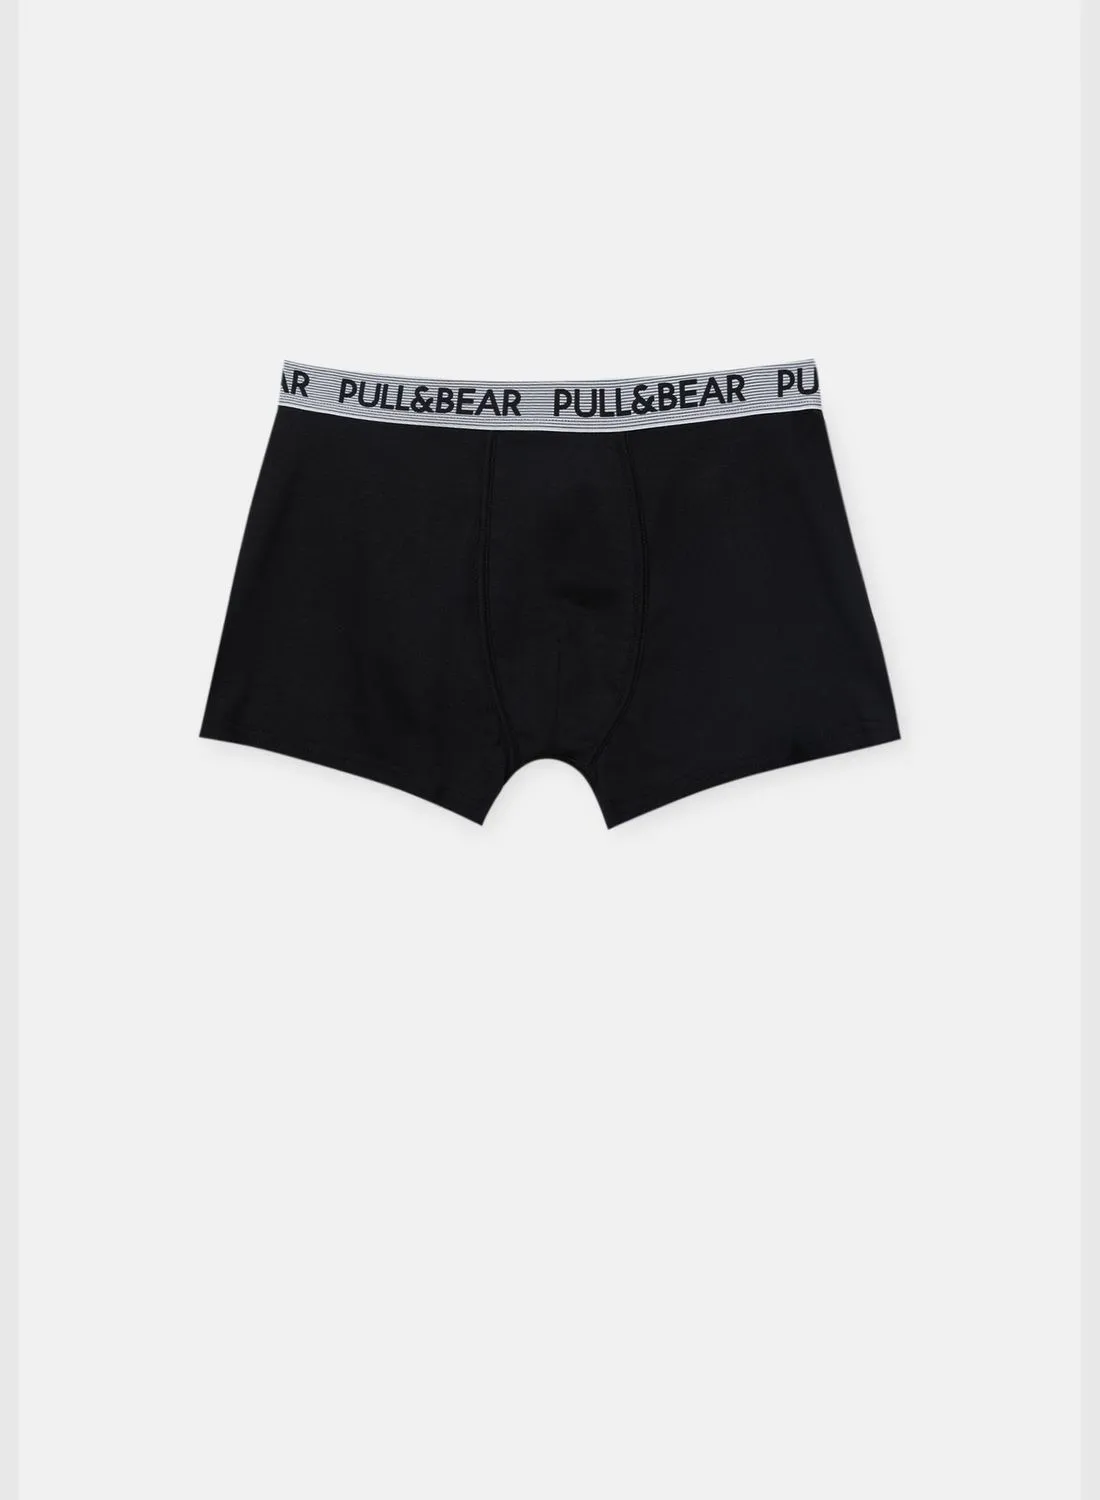 PULL&BEAR Pack of 3 boxers